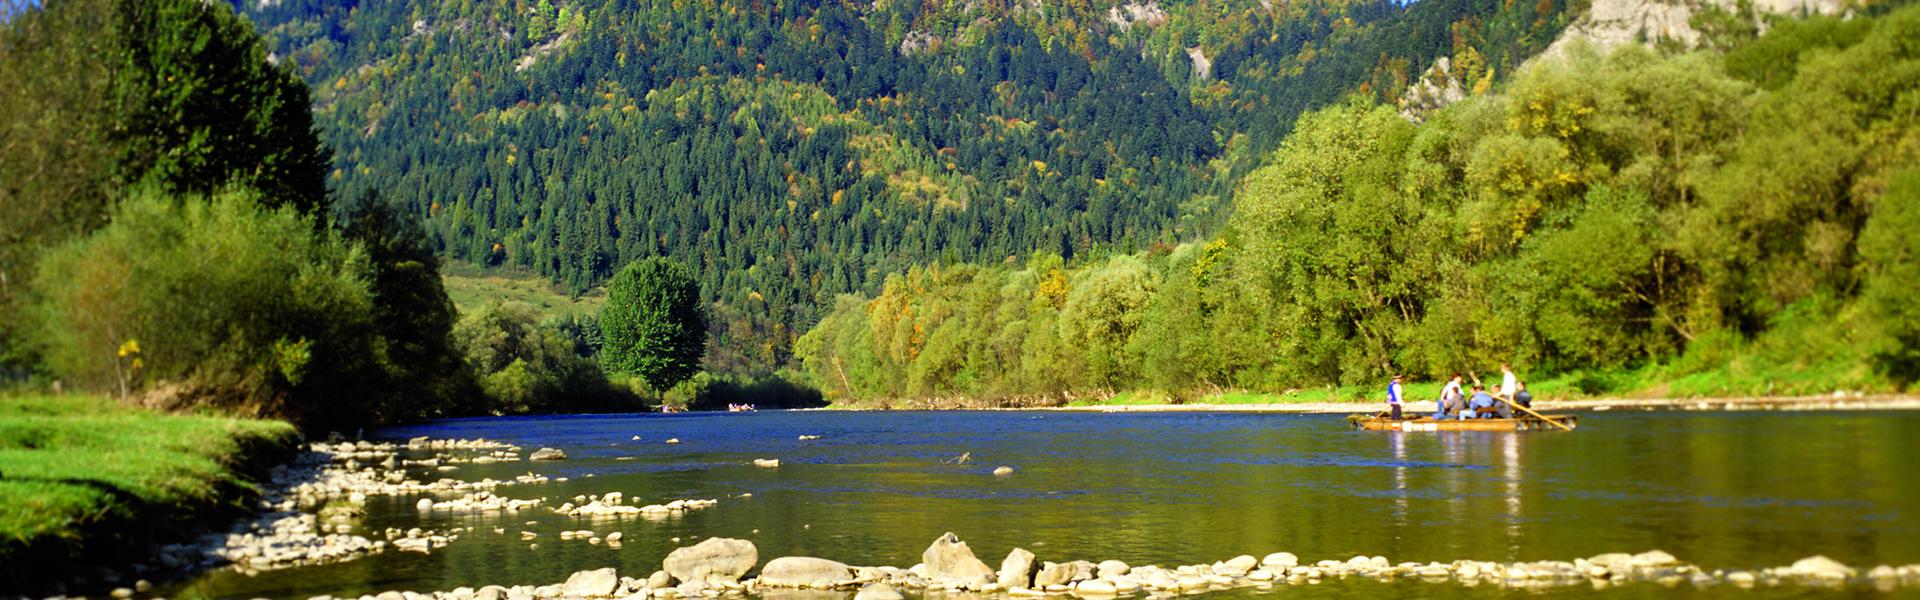 Image: The Pieniny. A place where you can breathe freely